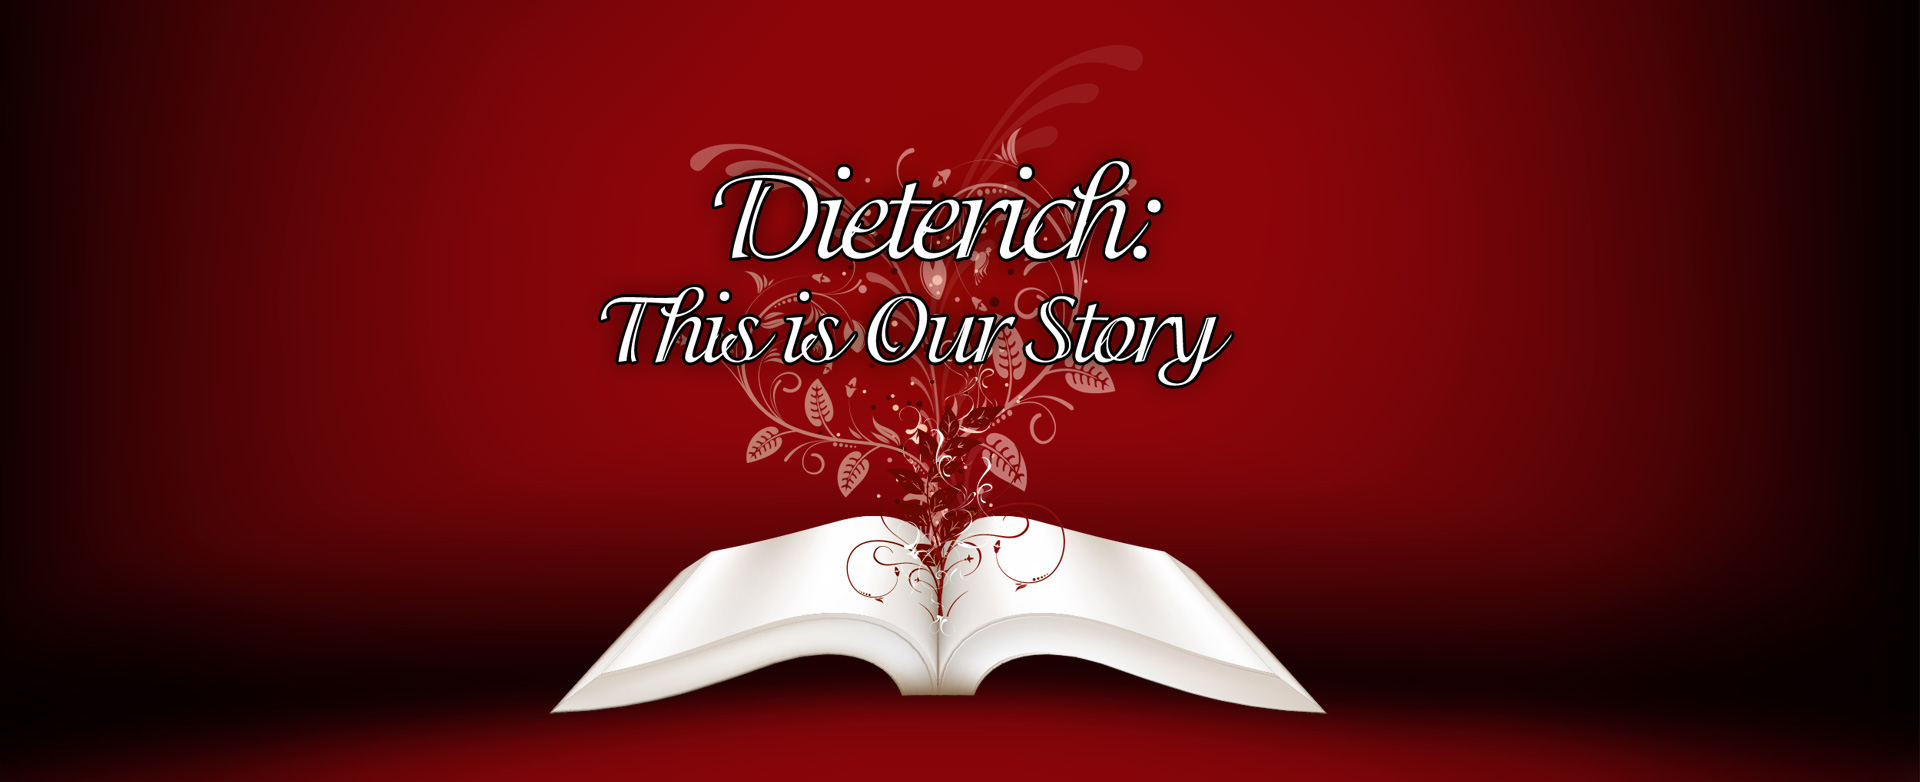 Dieterich: This is Our Story